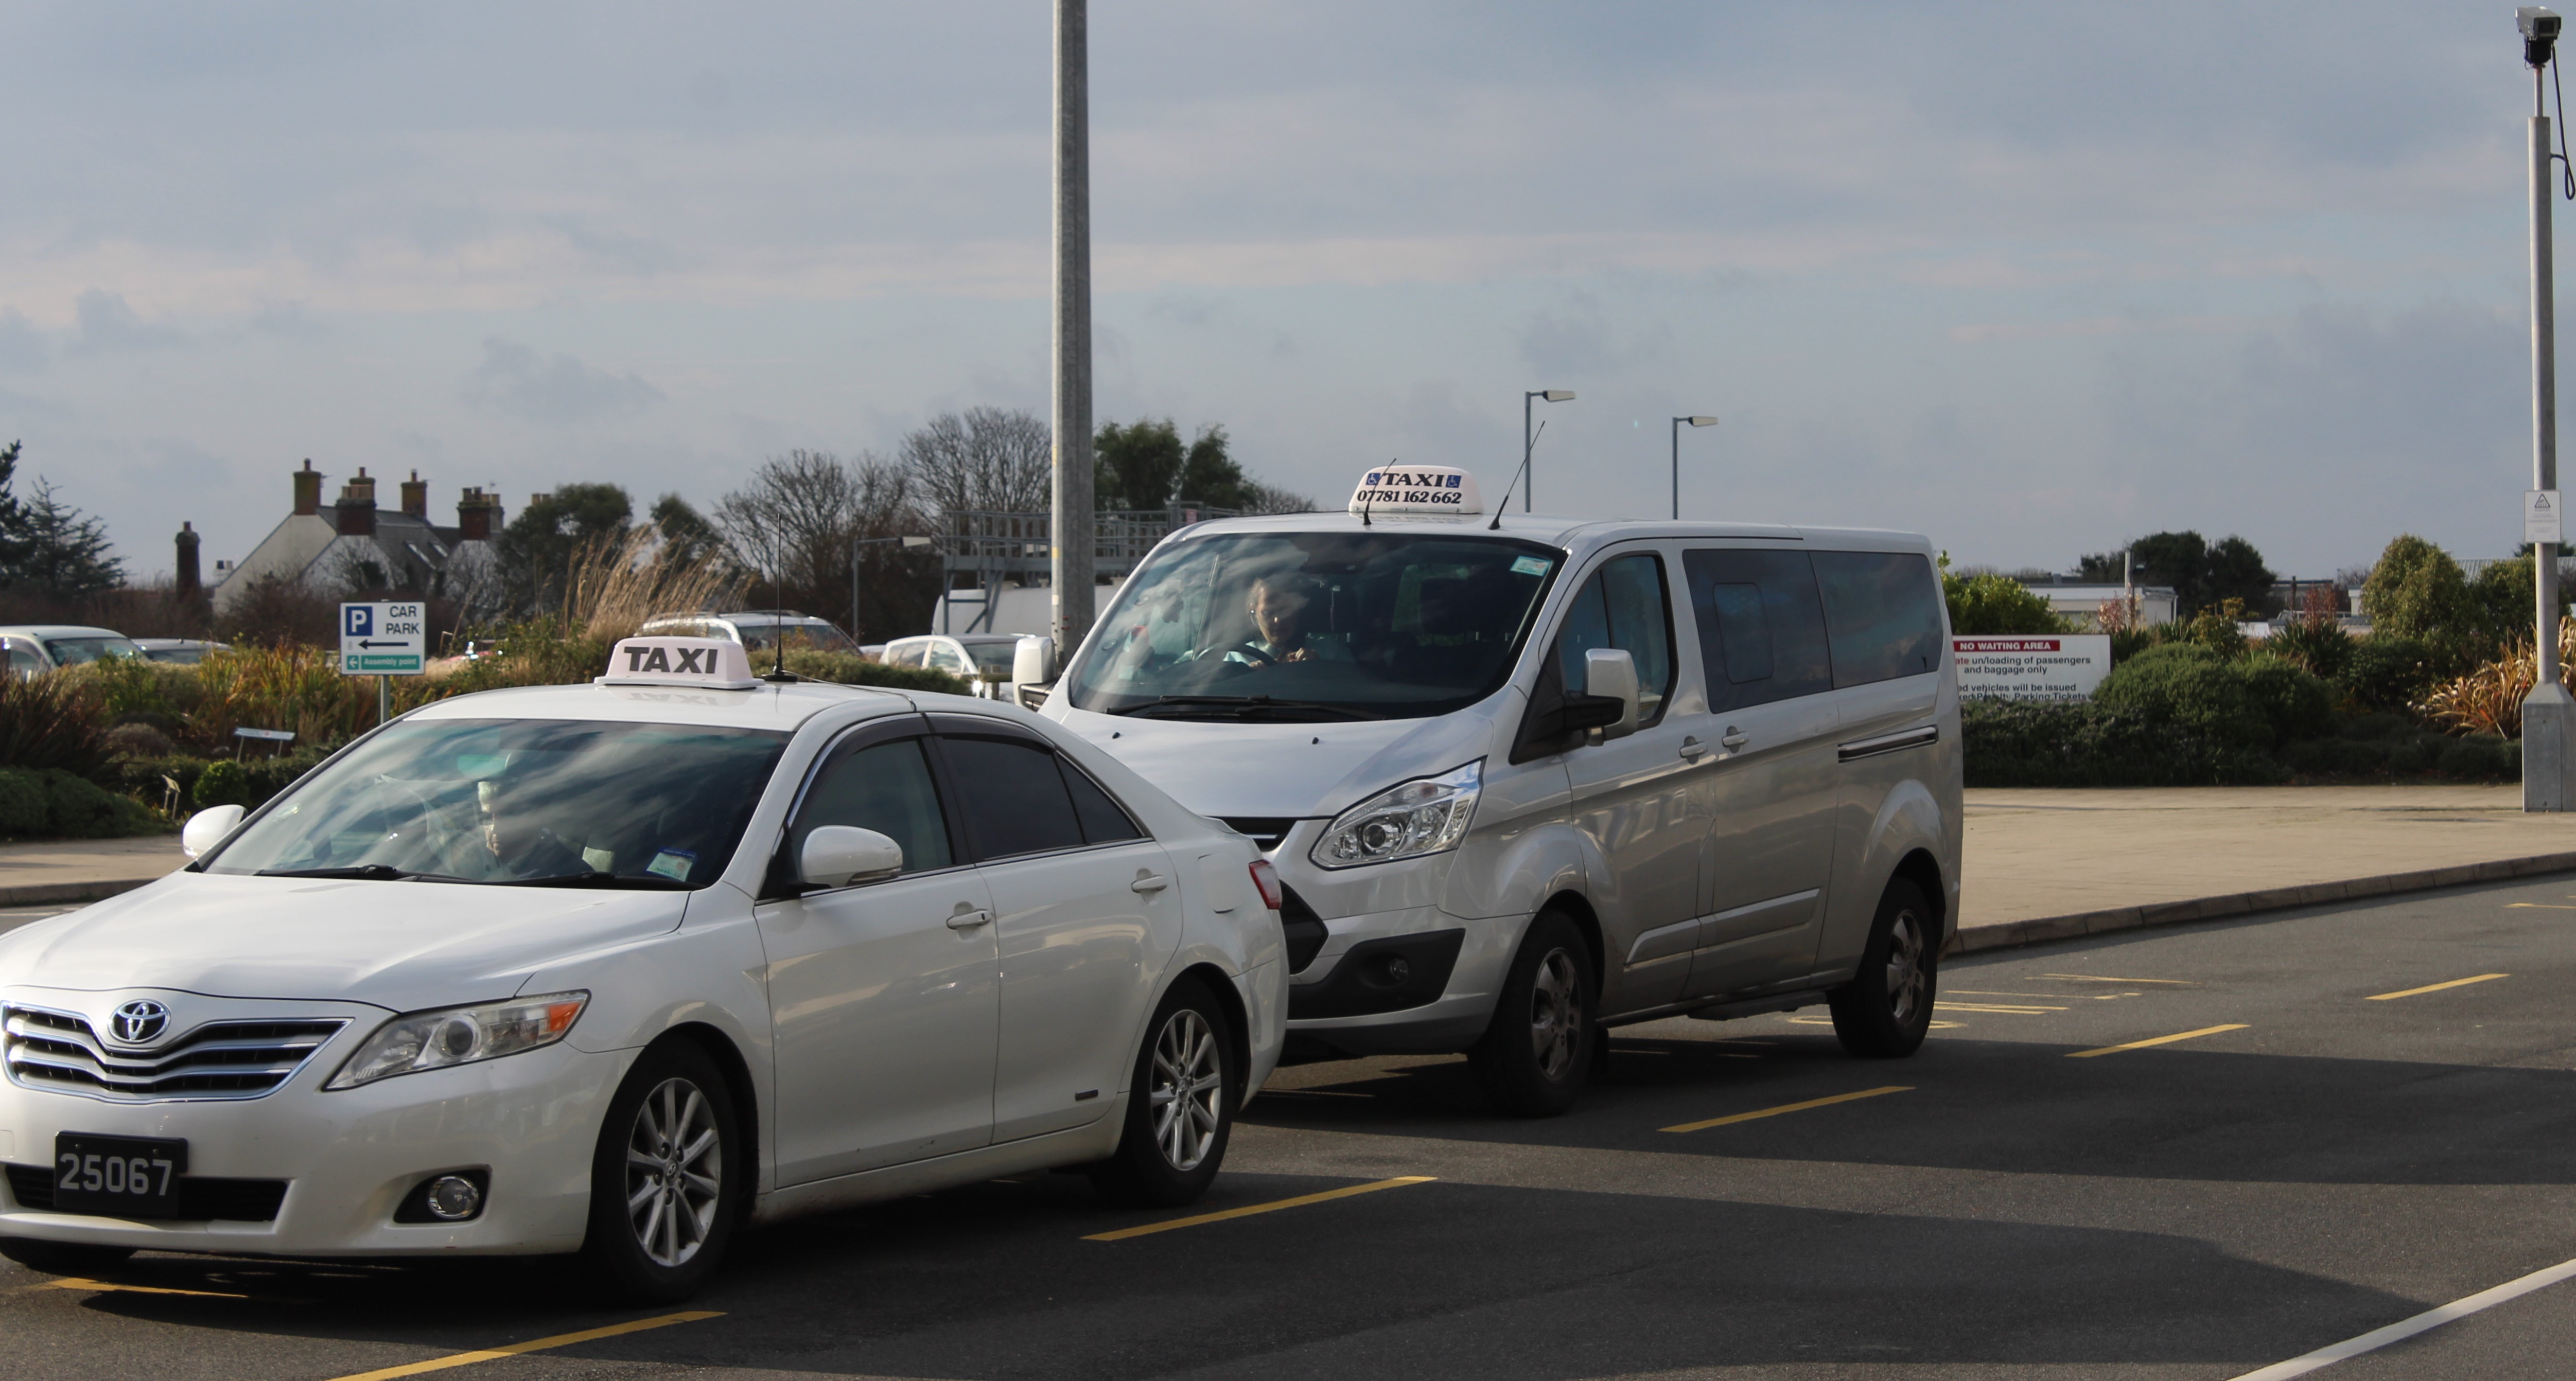 Accessible taxi services in Guernsey